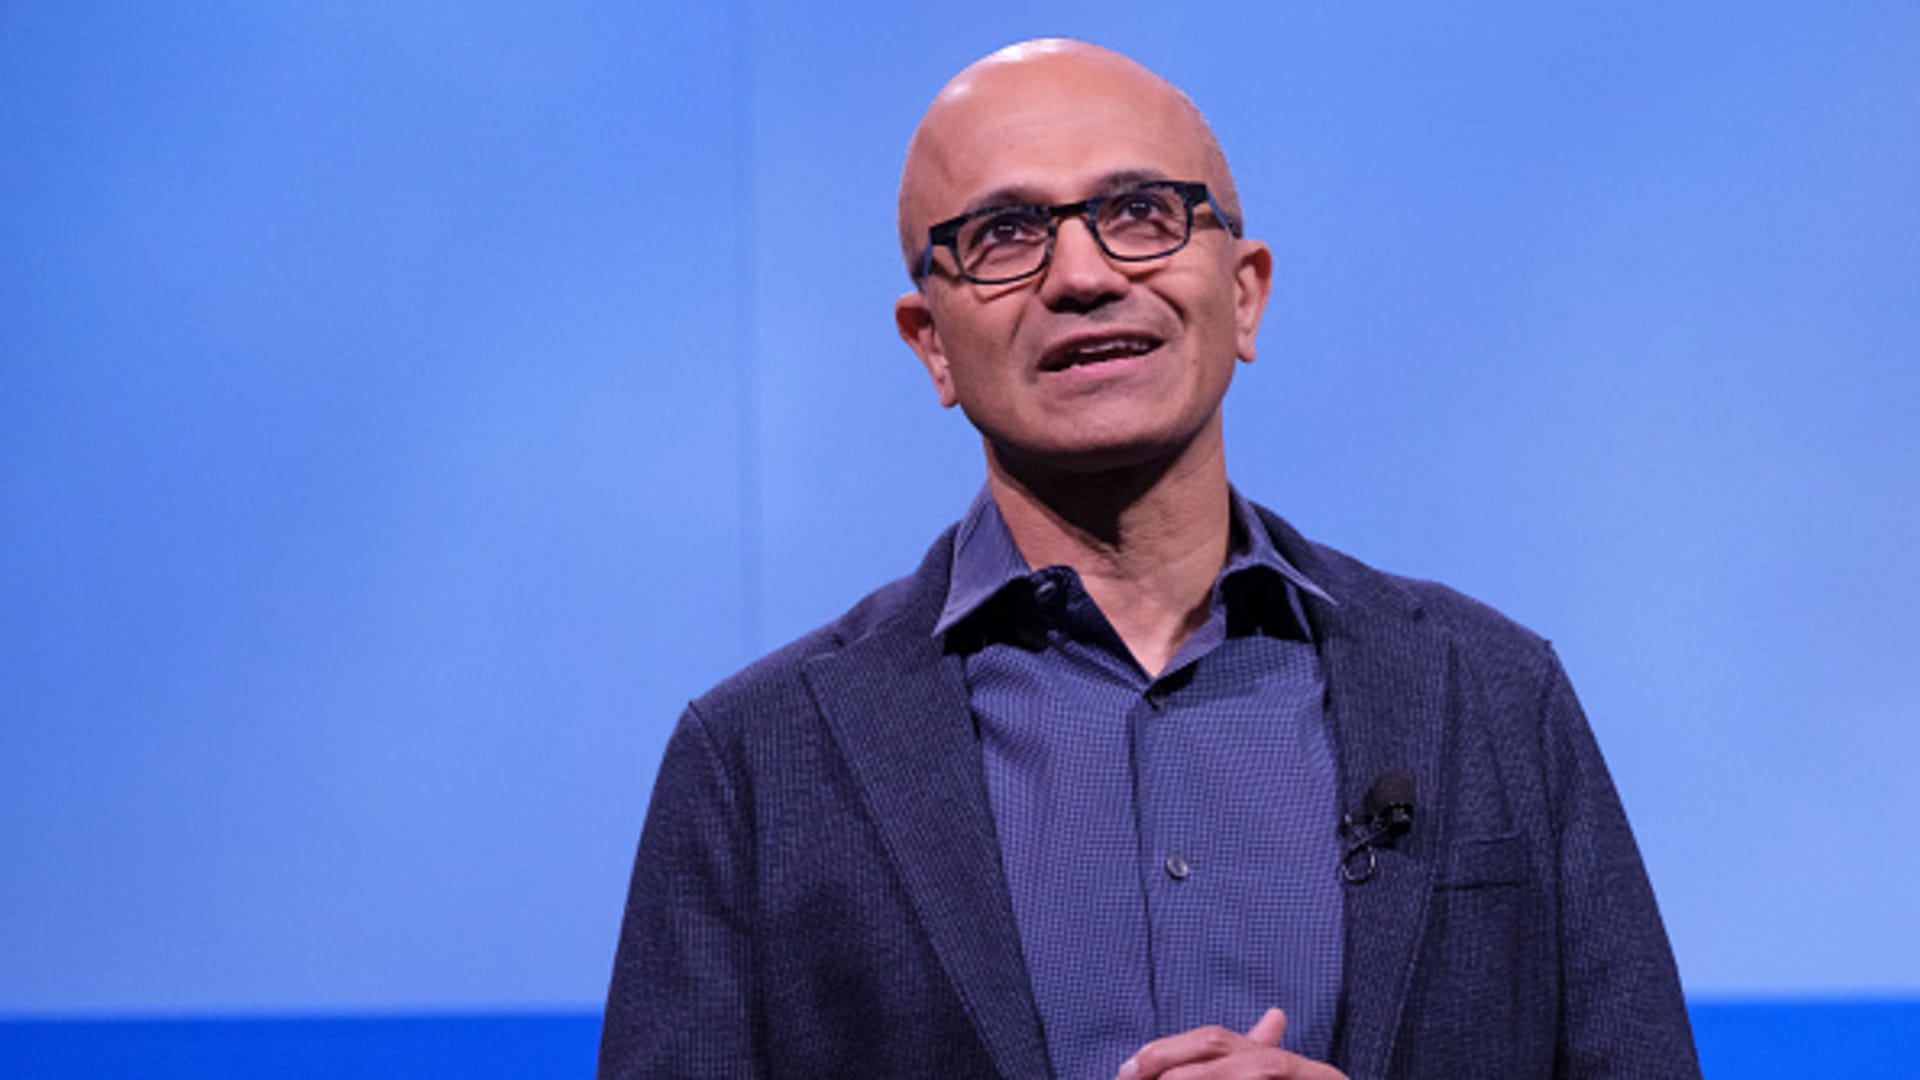 Don't wait for your next job to do your best work.” Microsoft CEO Satya  Nadella